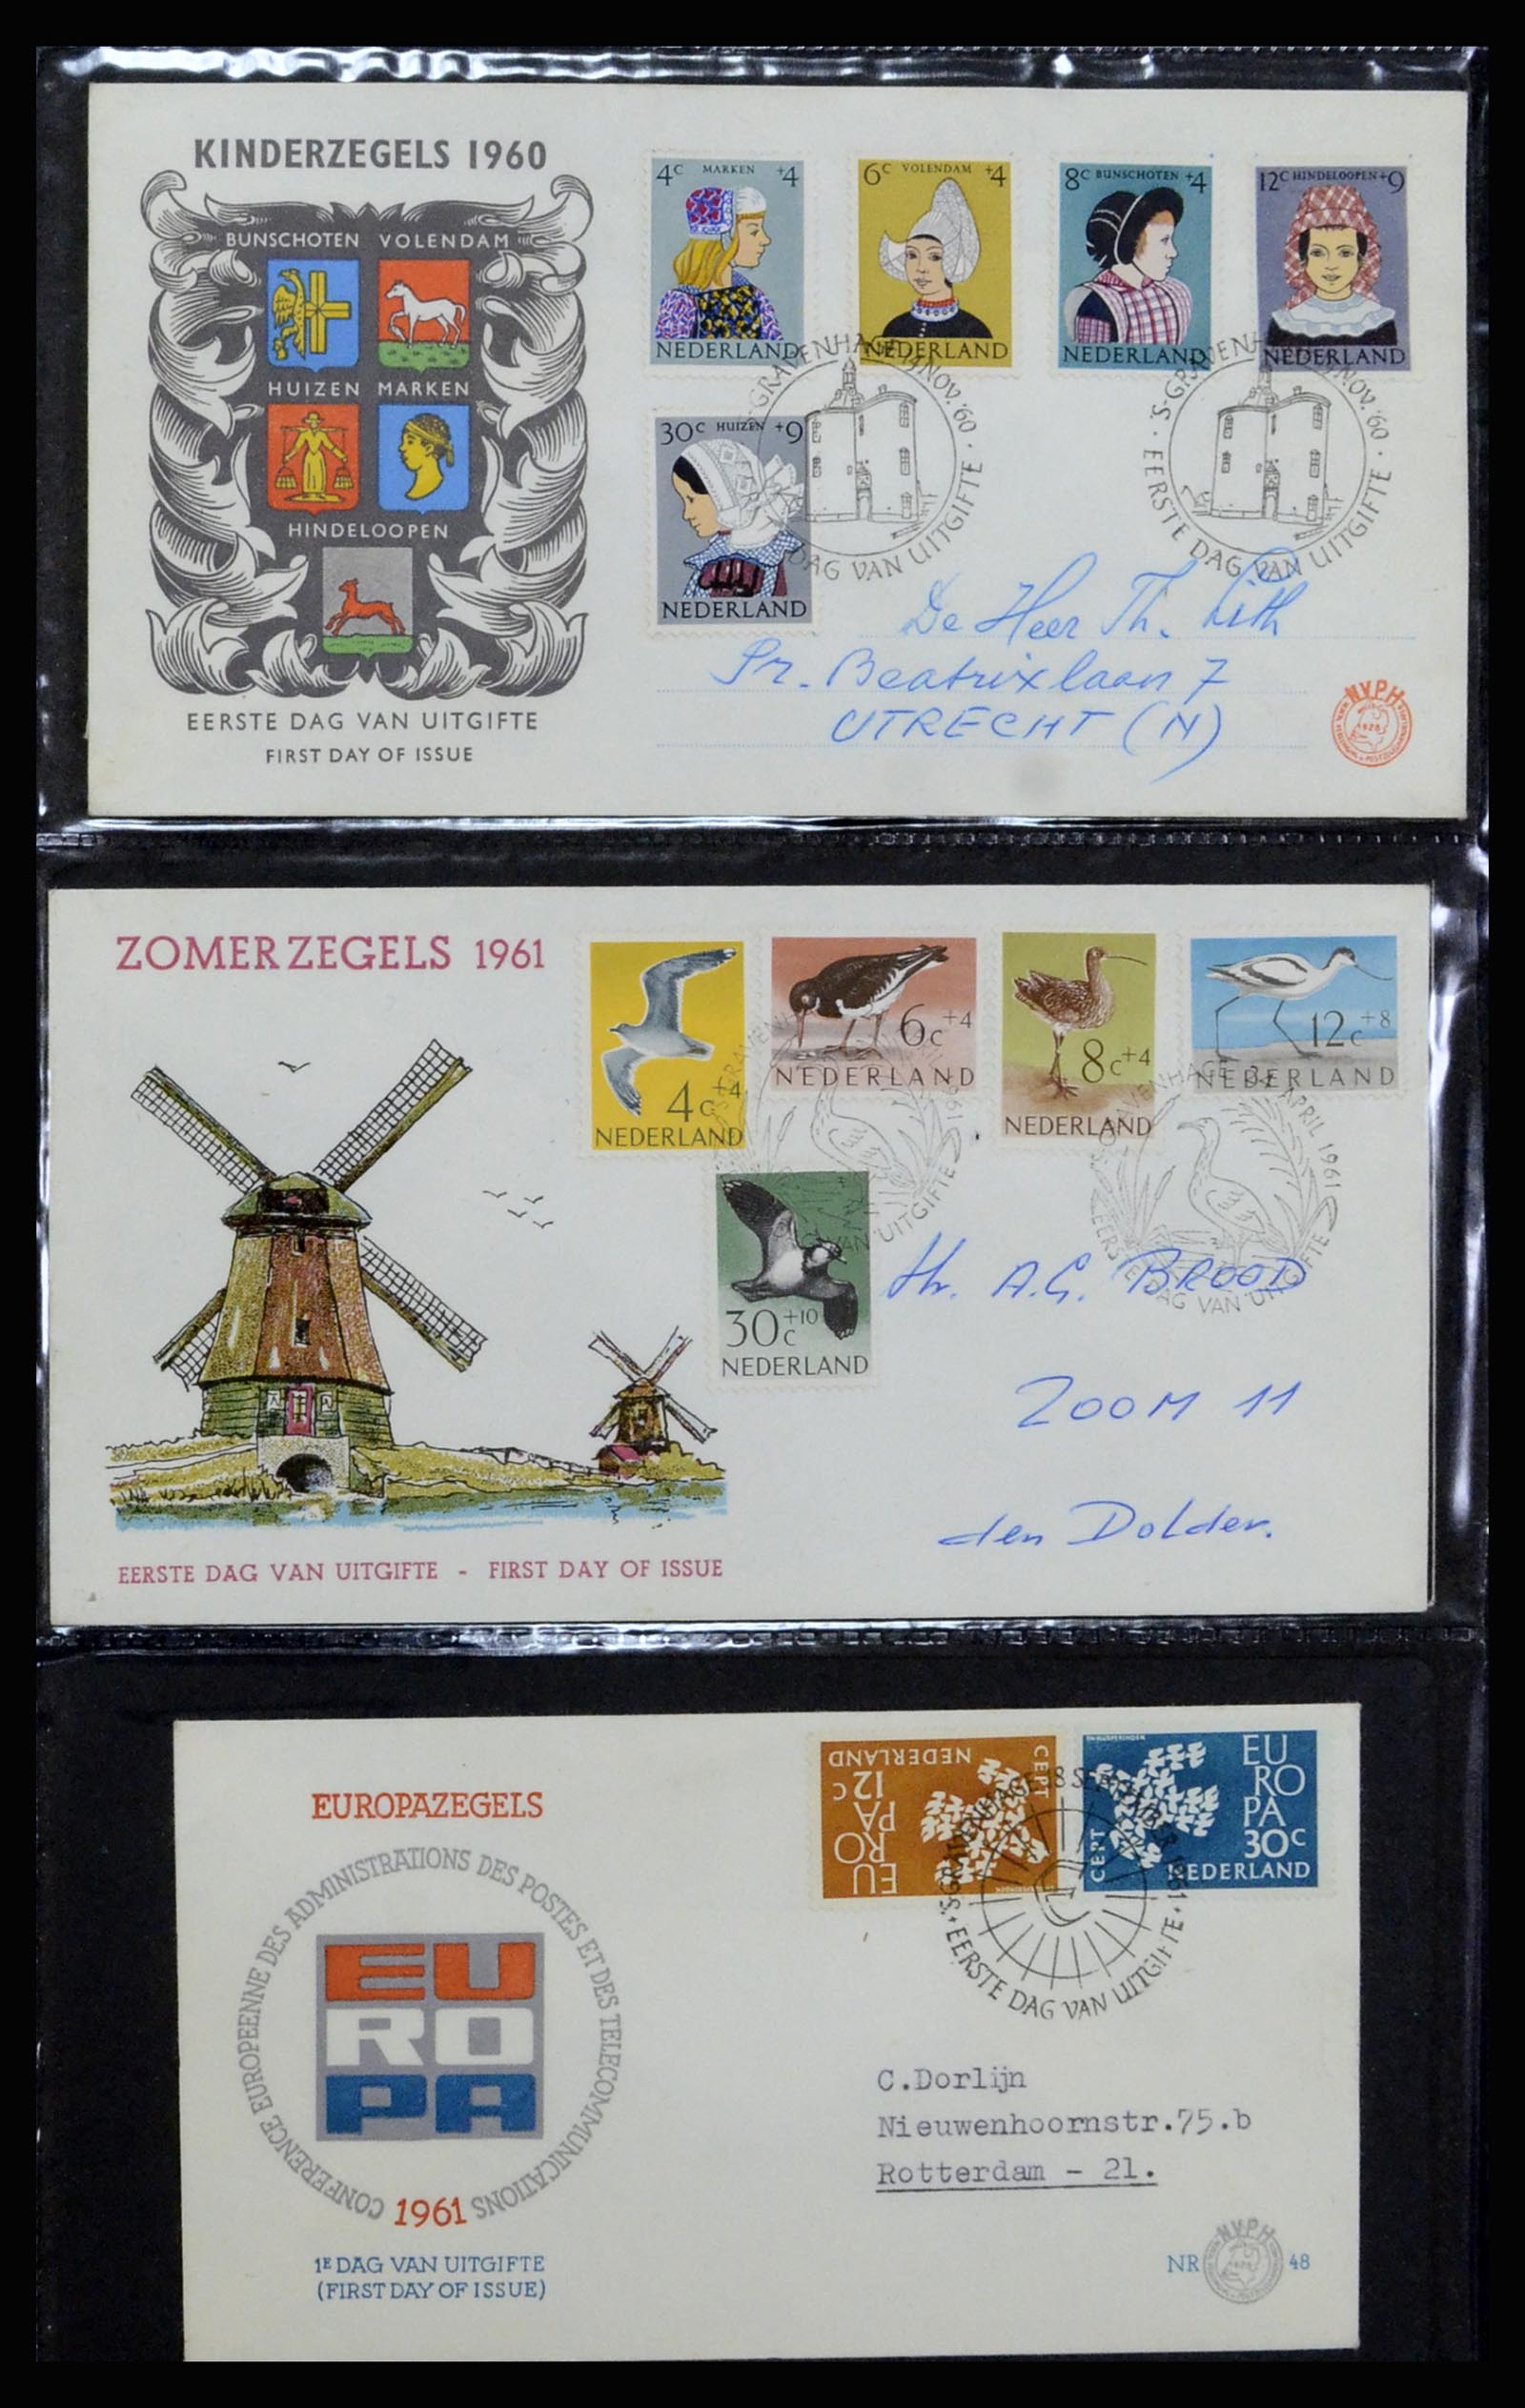 37197 017 - Stamp collection 37197 Netherlands FDC's 1950-2004.